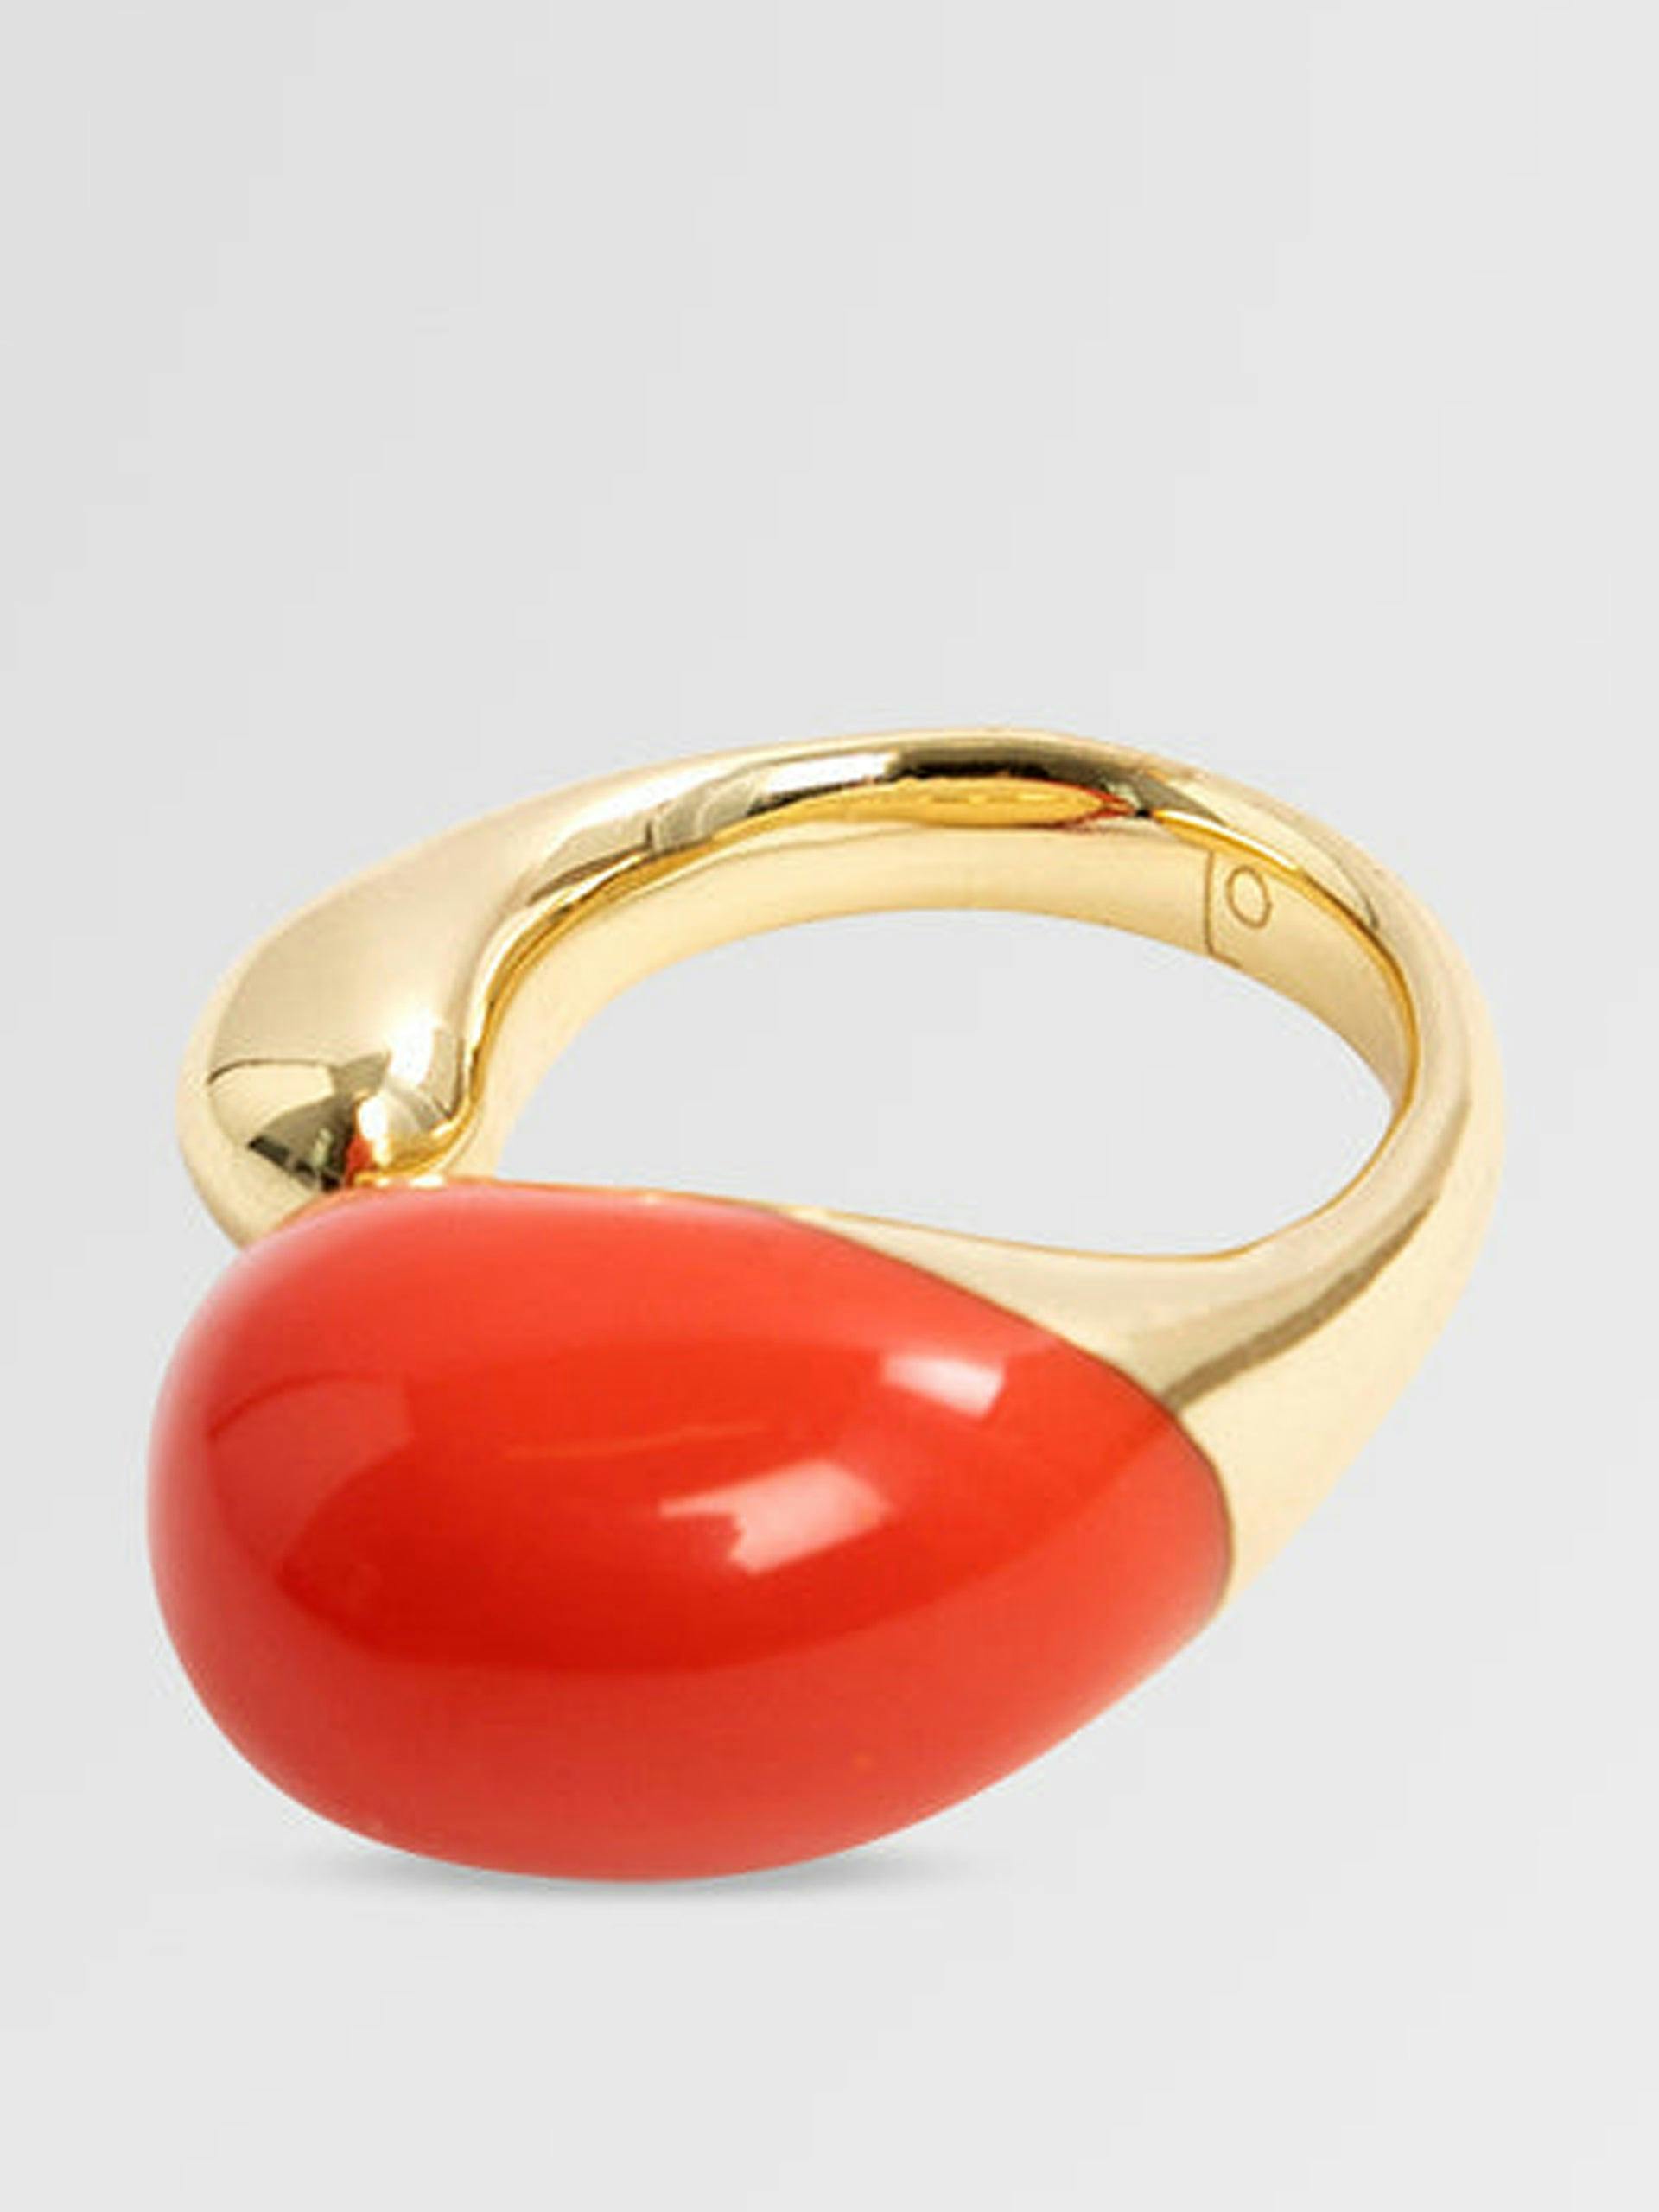 Gold and red ring